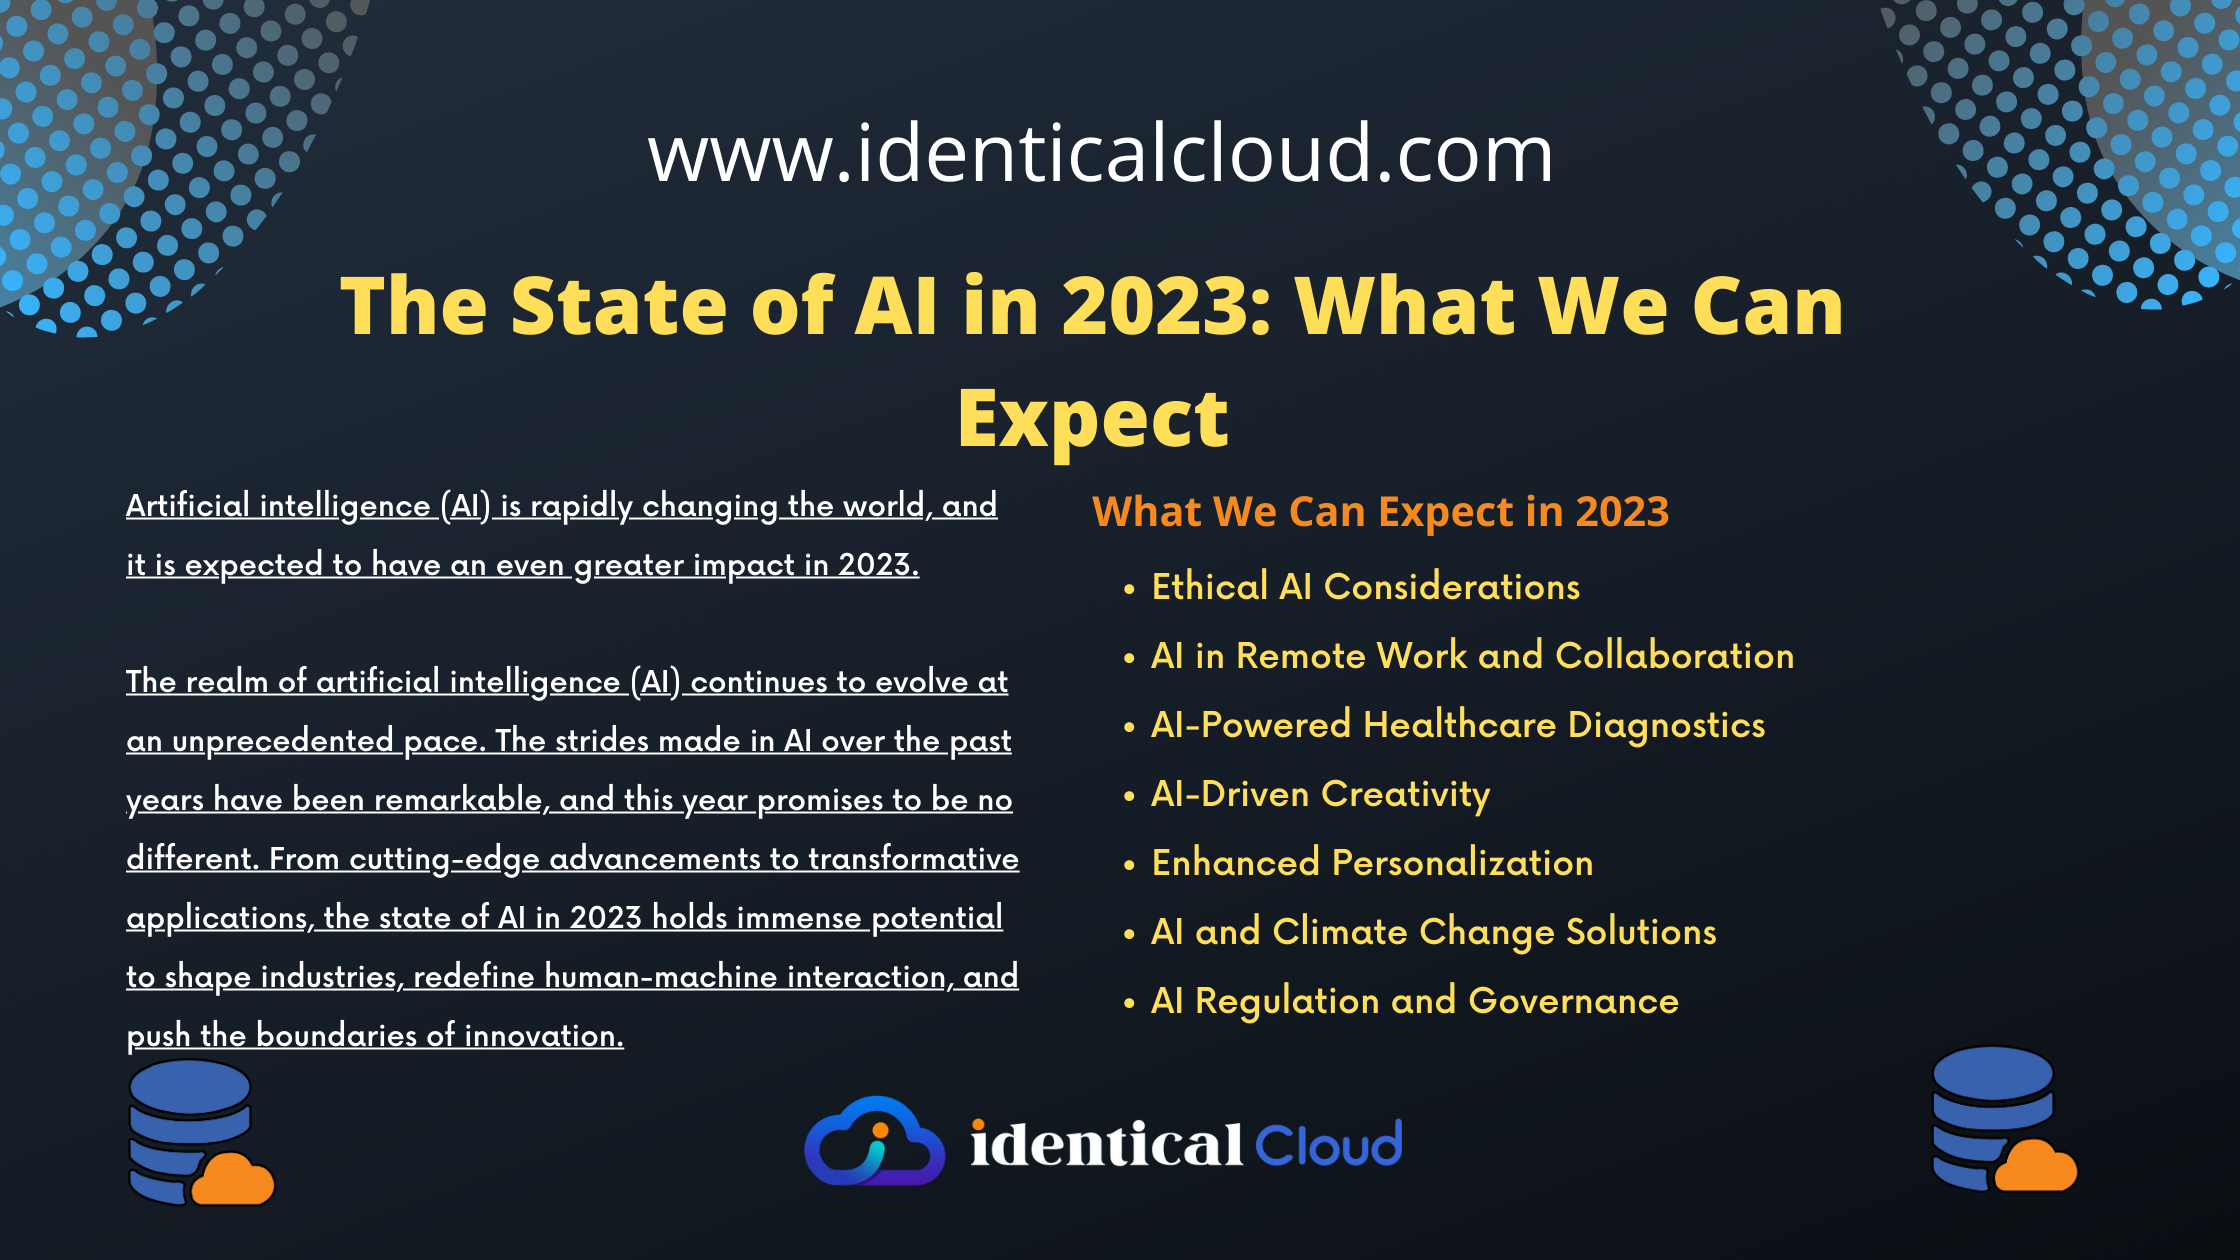 The State of AI in 2023: What We Can Expect - identicalcloud.com